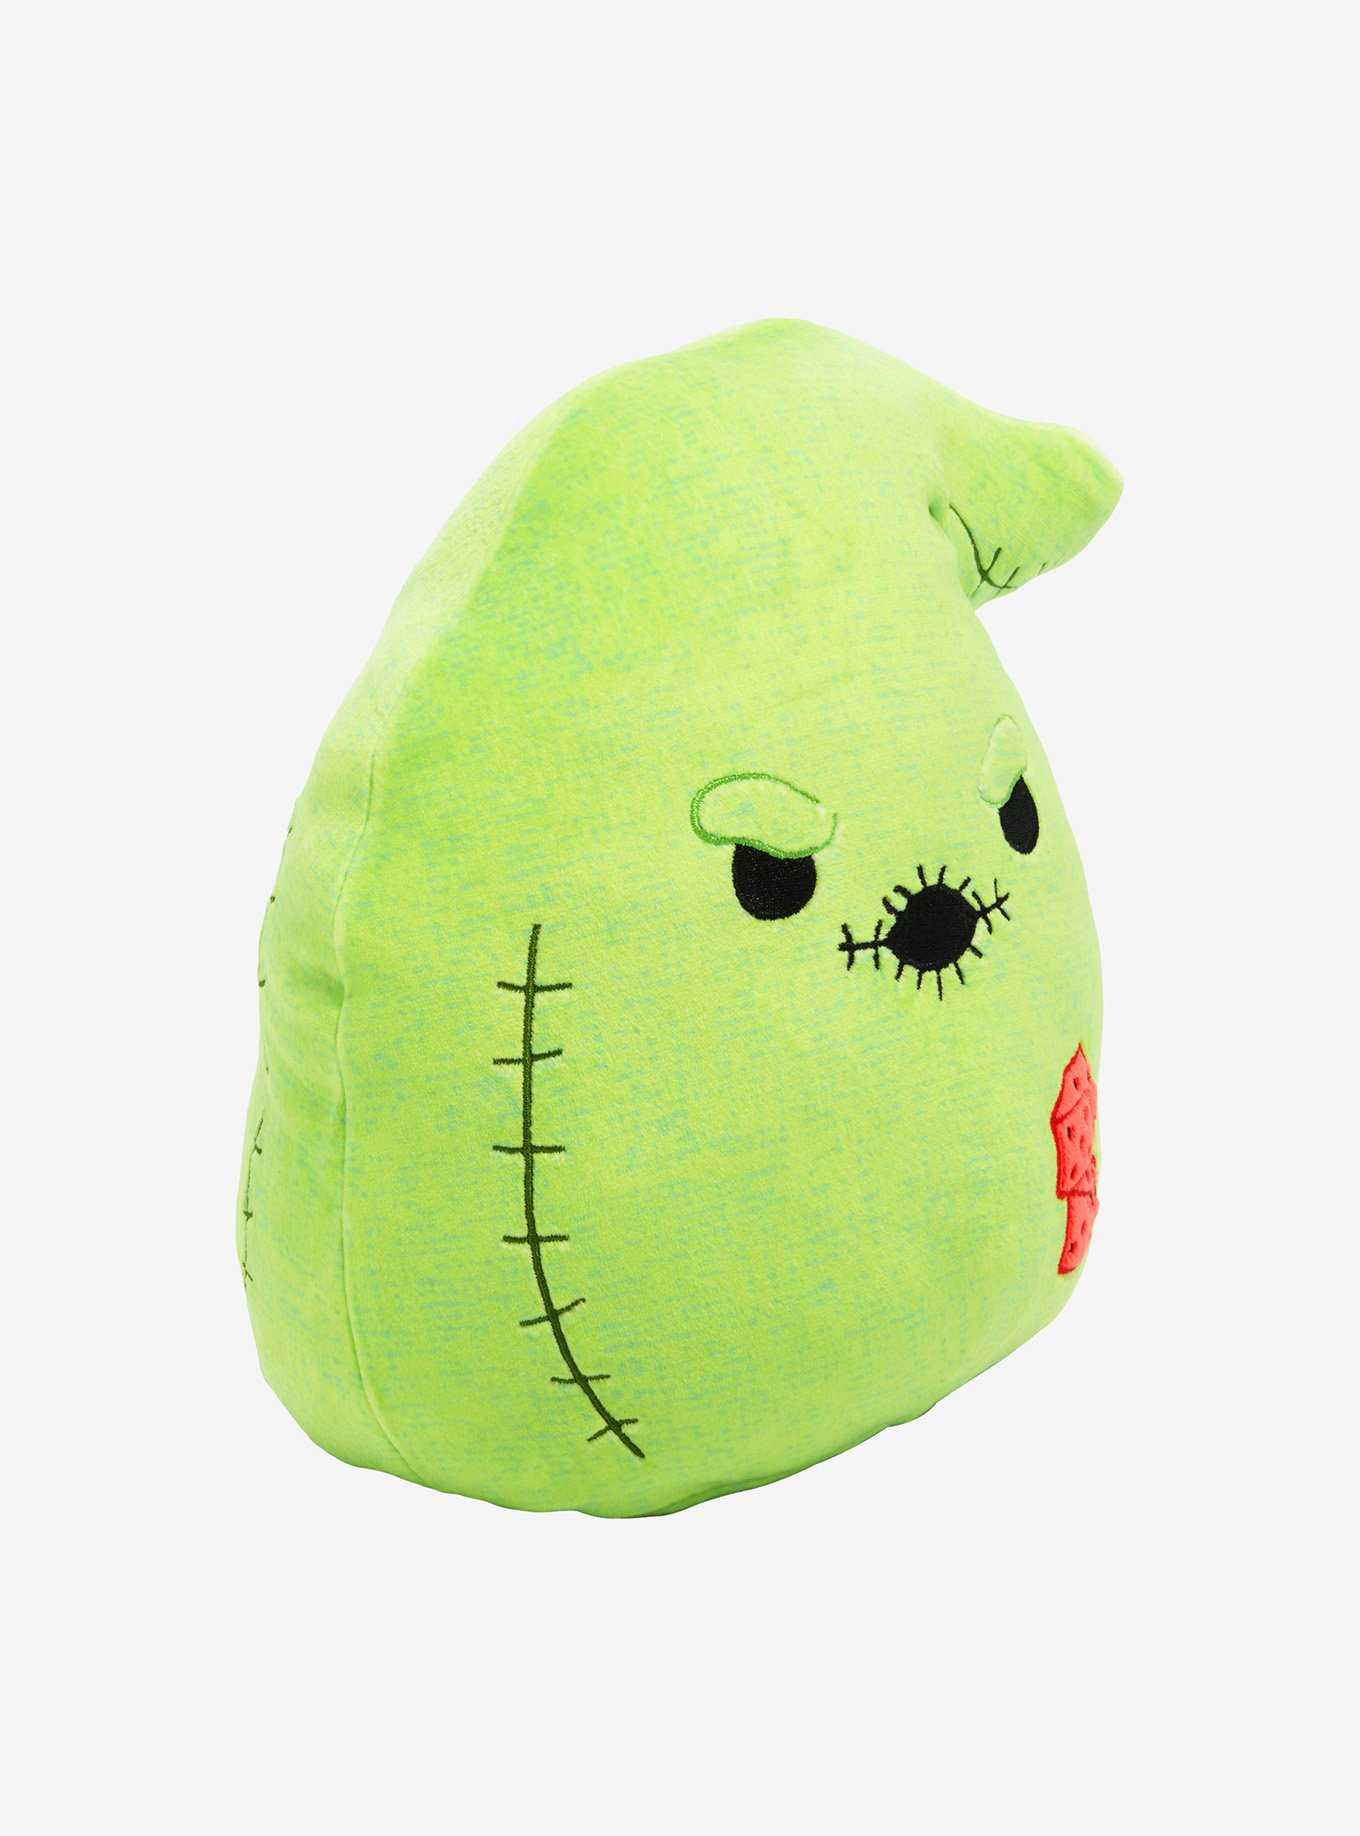 Squishmallows The Nightmare Before Christmas Oogie Boogie Plush, , hi-res